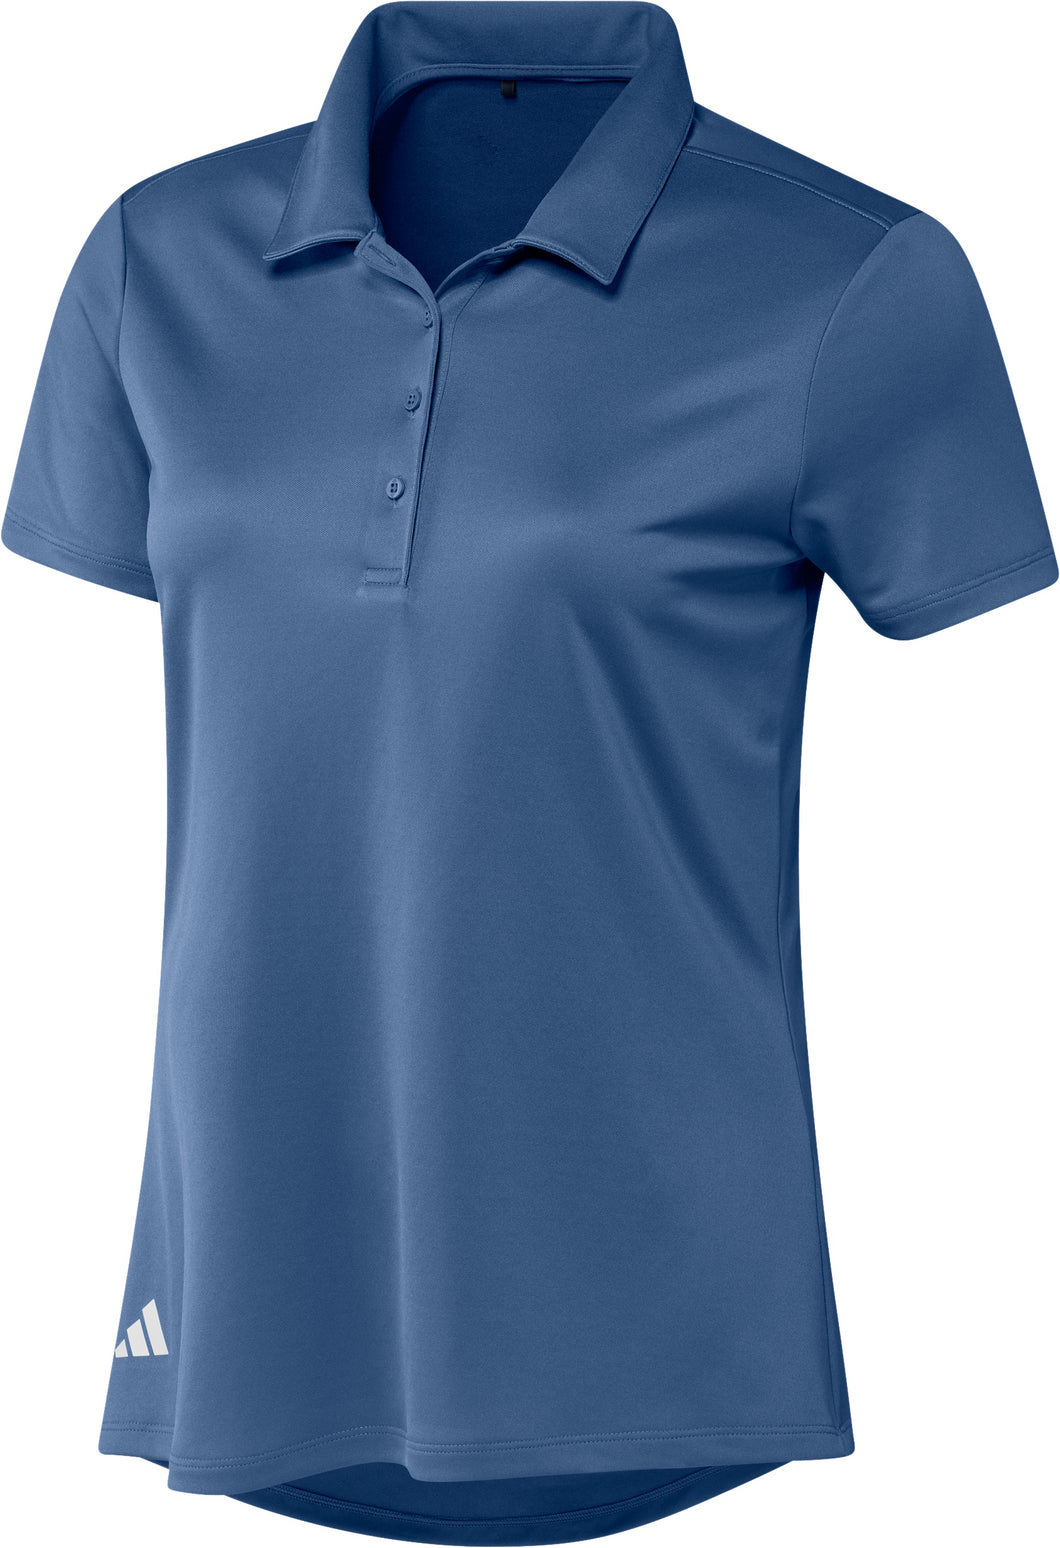 Women's Solid Performance Polo (5 Colors)